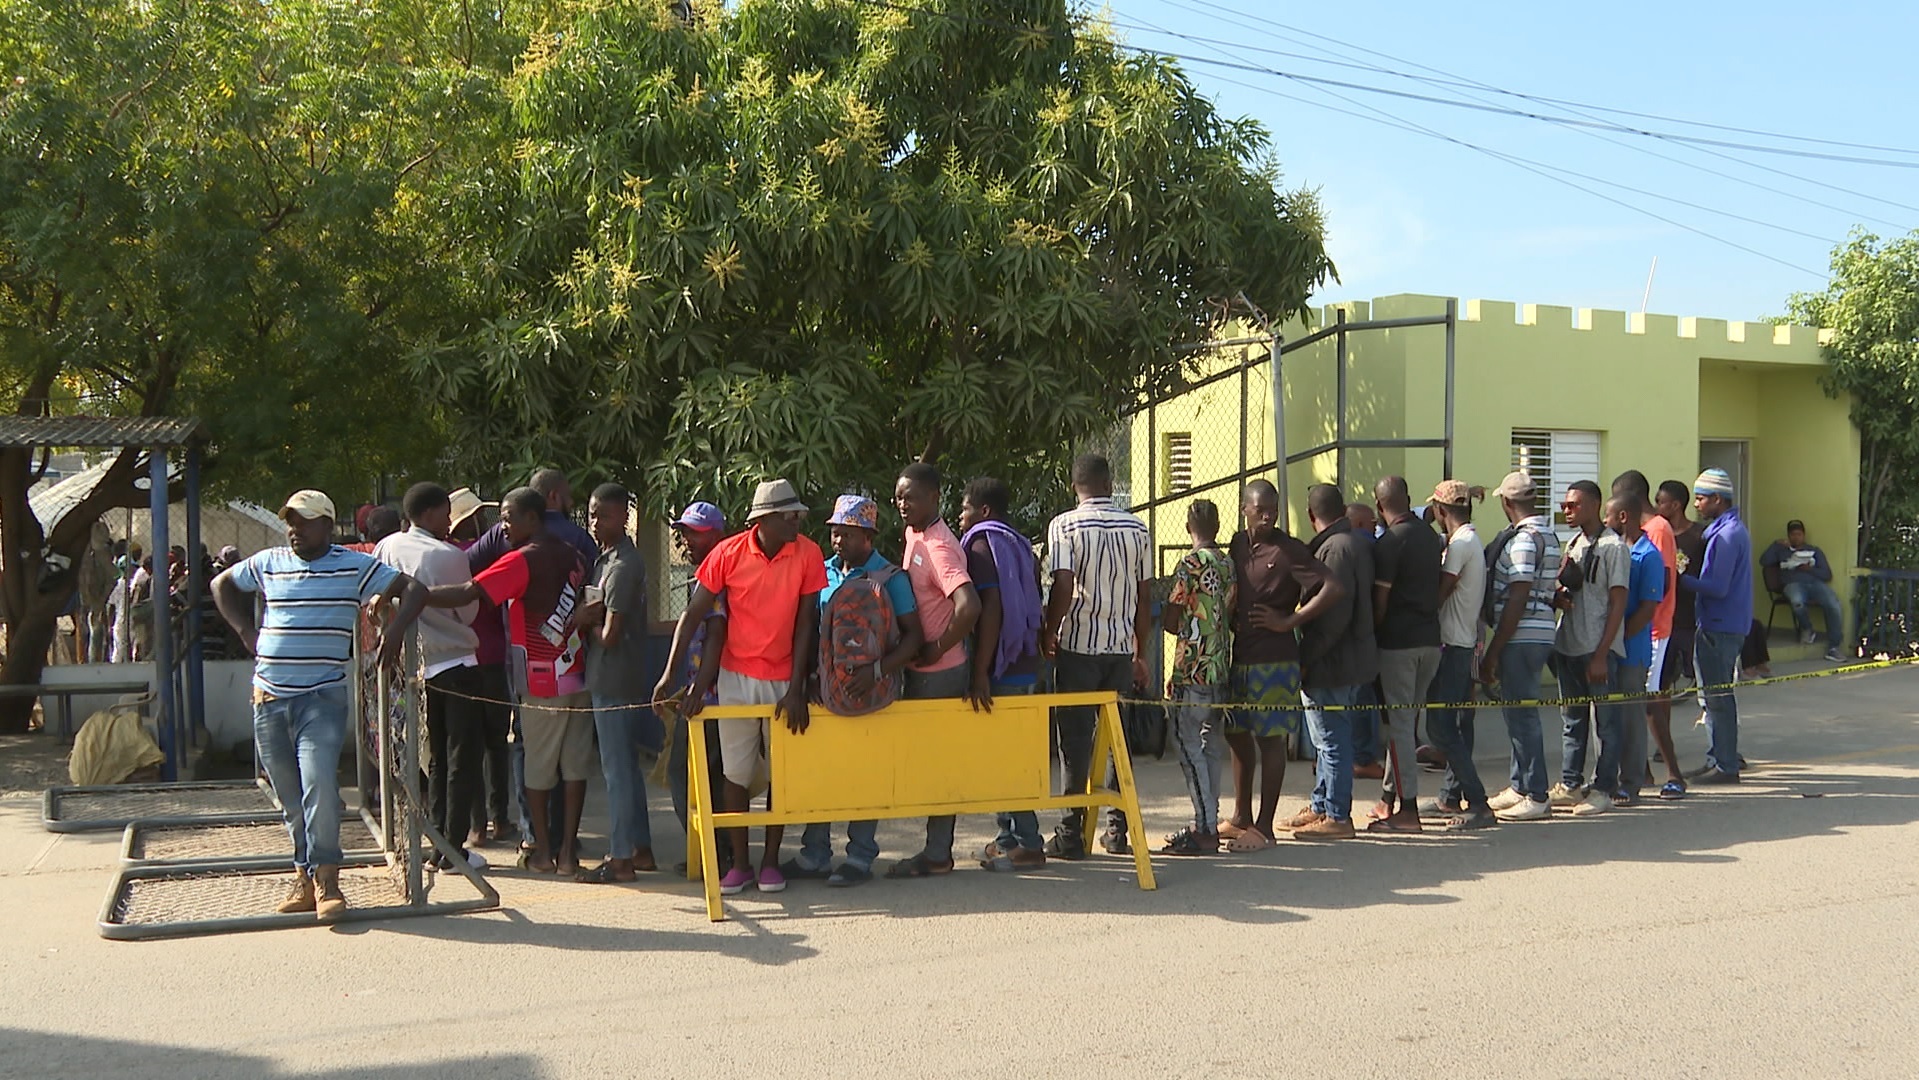 Al Jazeera films Haitians being deported back across border into chaos | Migration